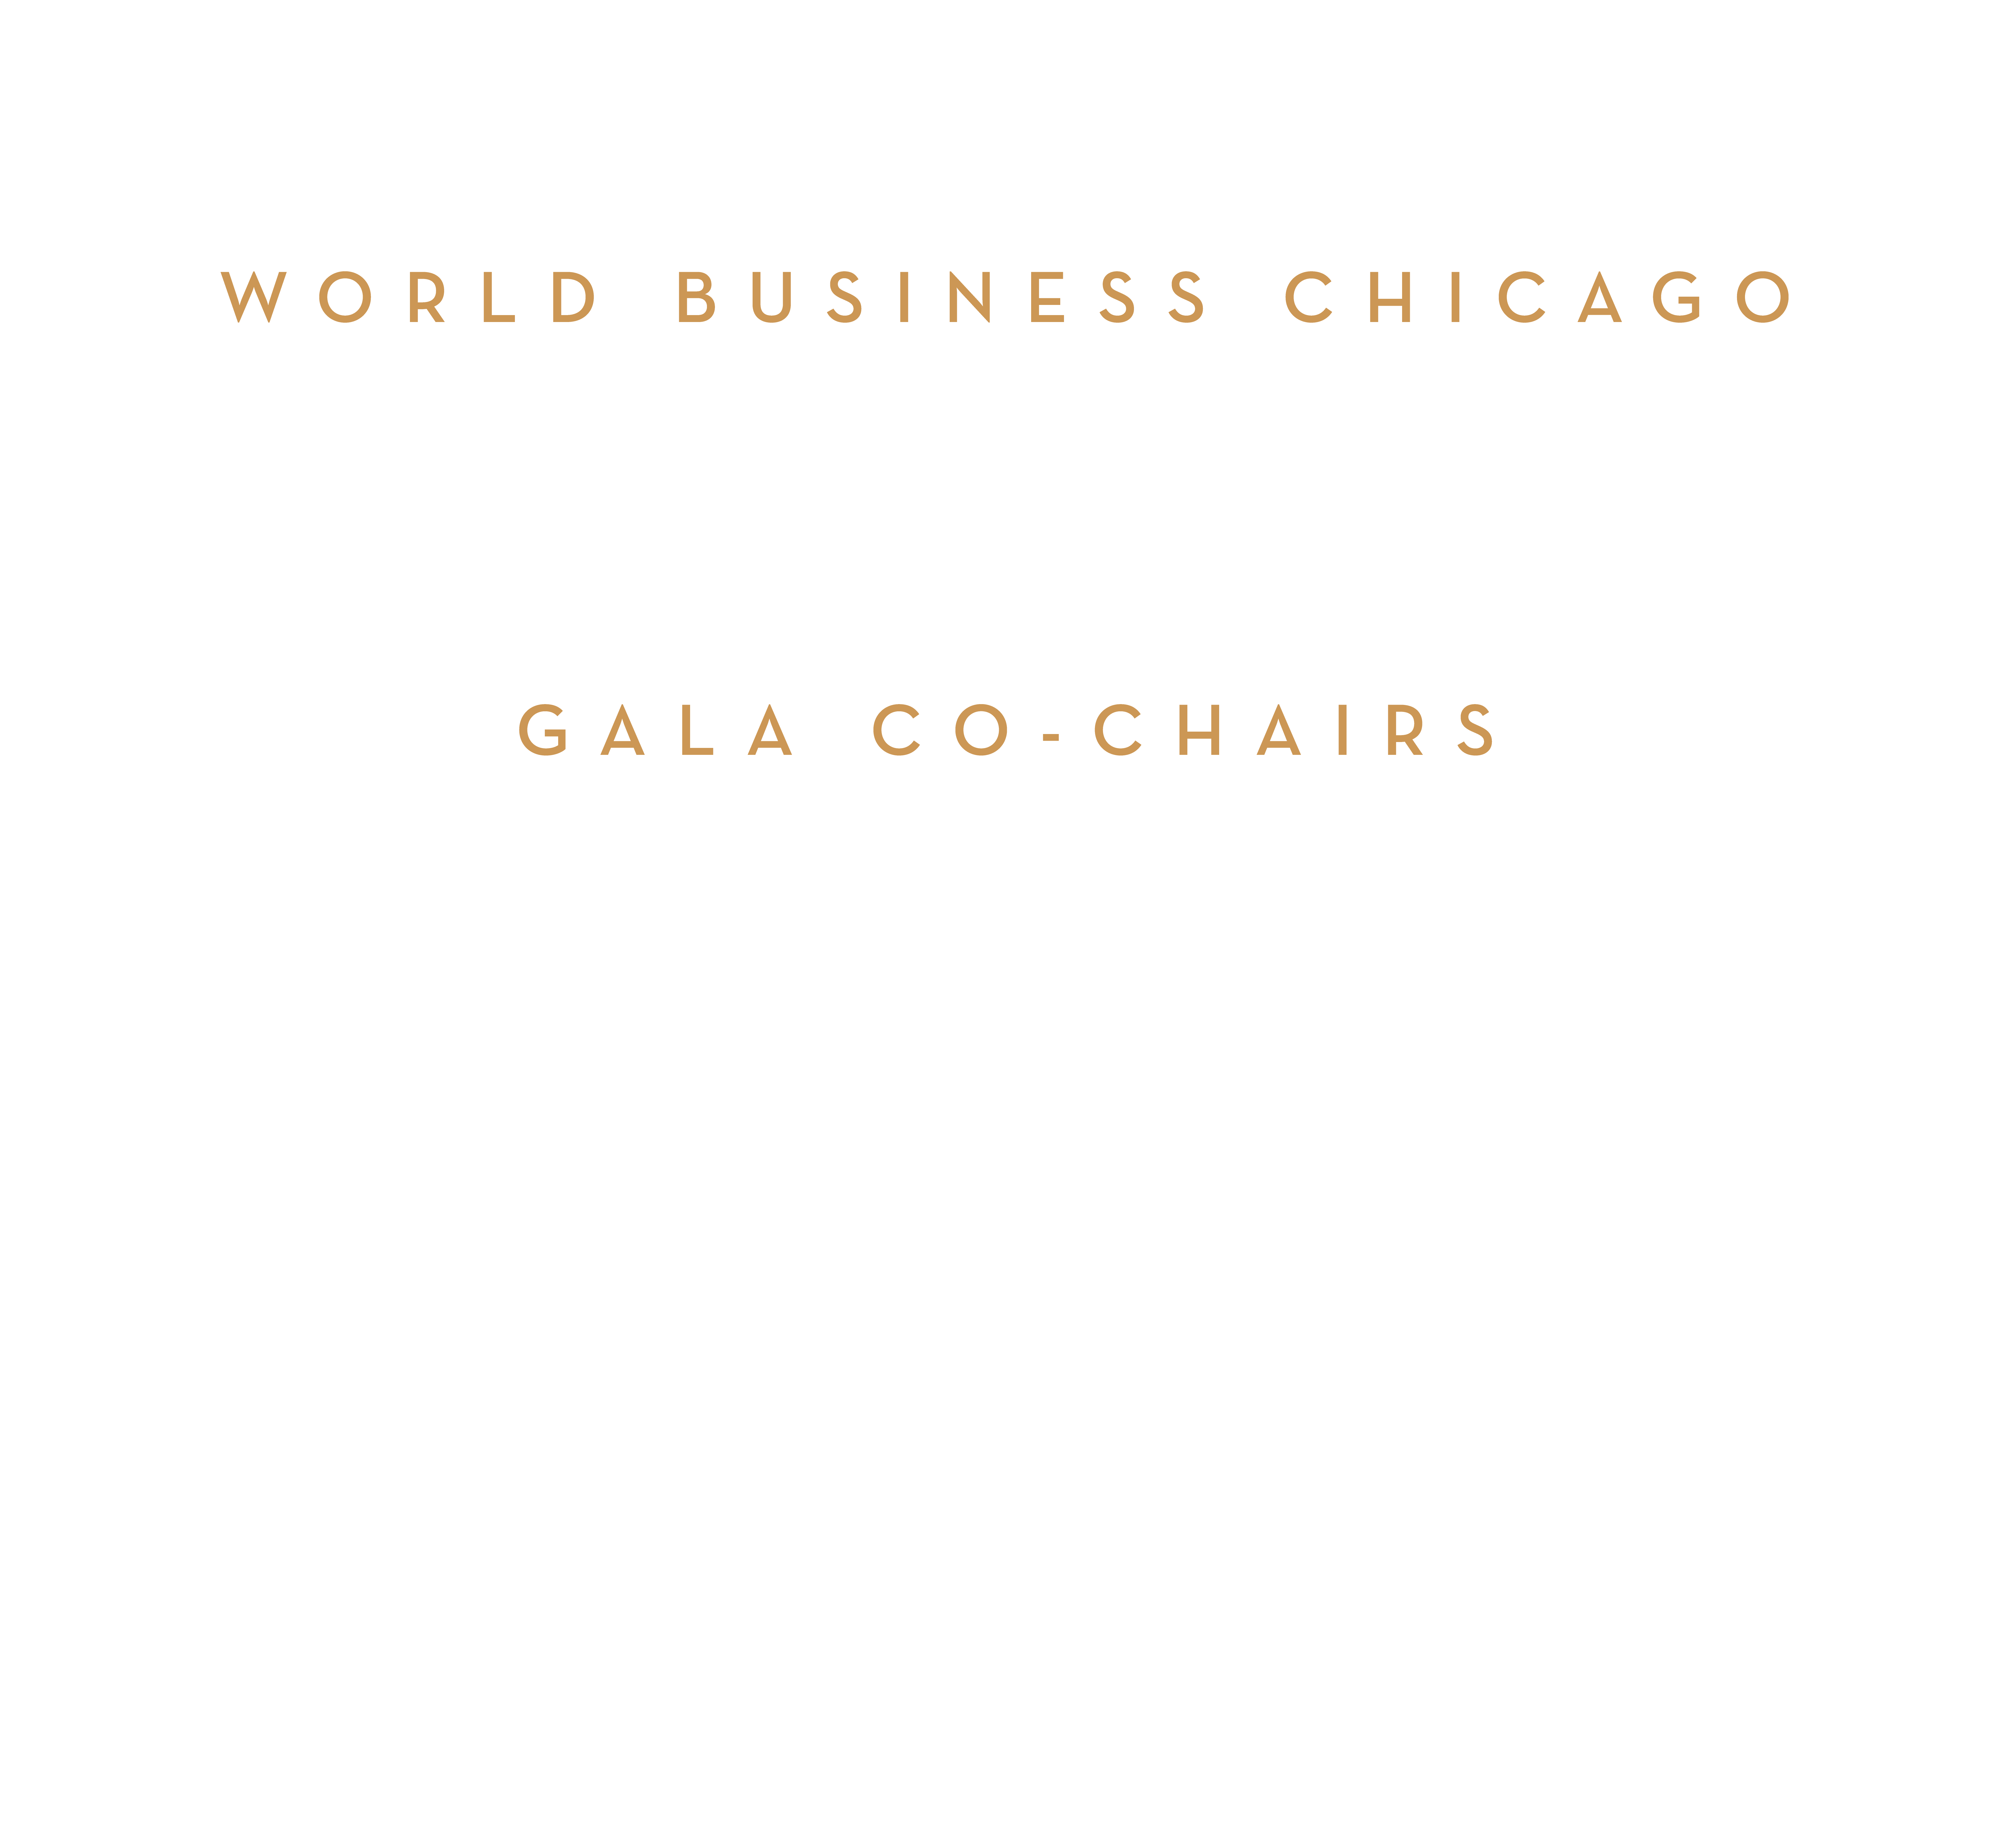 World Business Chicago Mayor Brandon Johnson, Chair, Mellody Hobson, Vice Chair, Michael Fassnacht, President & CEO. Gala Co-Chairs. Her Excellency Reyna Torres Mendivil, Dean, Chicago Consular Corps, Dr. Opella Ernest, President, Health Care Service Corporation (HCSC), Melloday Hobson, Co-CEO 7 President Ariel Investments, Pin Ni, President Wanxiang America Corporation, Jose Luis Prado, Chairman, Tropicale Foods & Former President, Quaker Oats North America, Richard Price, Executive Chairman Mesirow, James R. Reynolds, Jr. Chairman & CEO Loop Capital Markets LLC, John C. Robak, Former Chairman & CEO, Greely and Hansen, Michael J Sacks, Chairman & CEO, GCM Grosvenor, Smita Shah, President & CEO, SPAAN Tech, Ind.